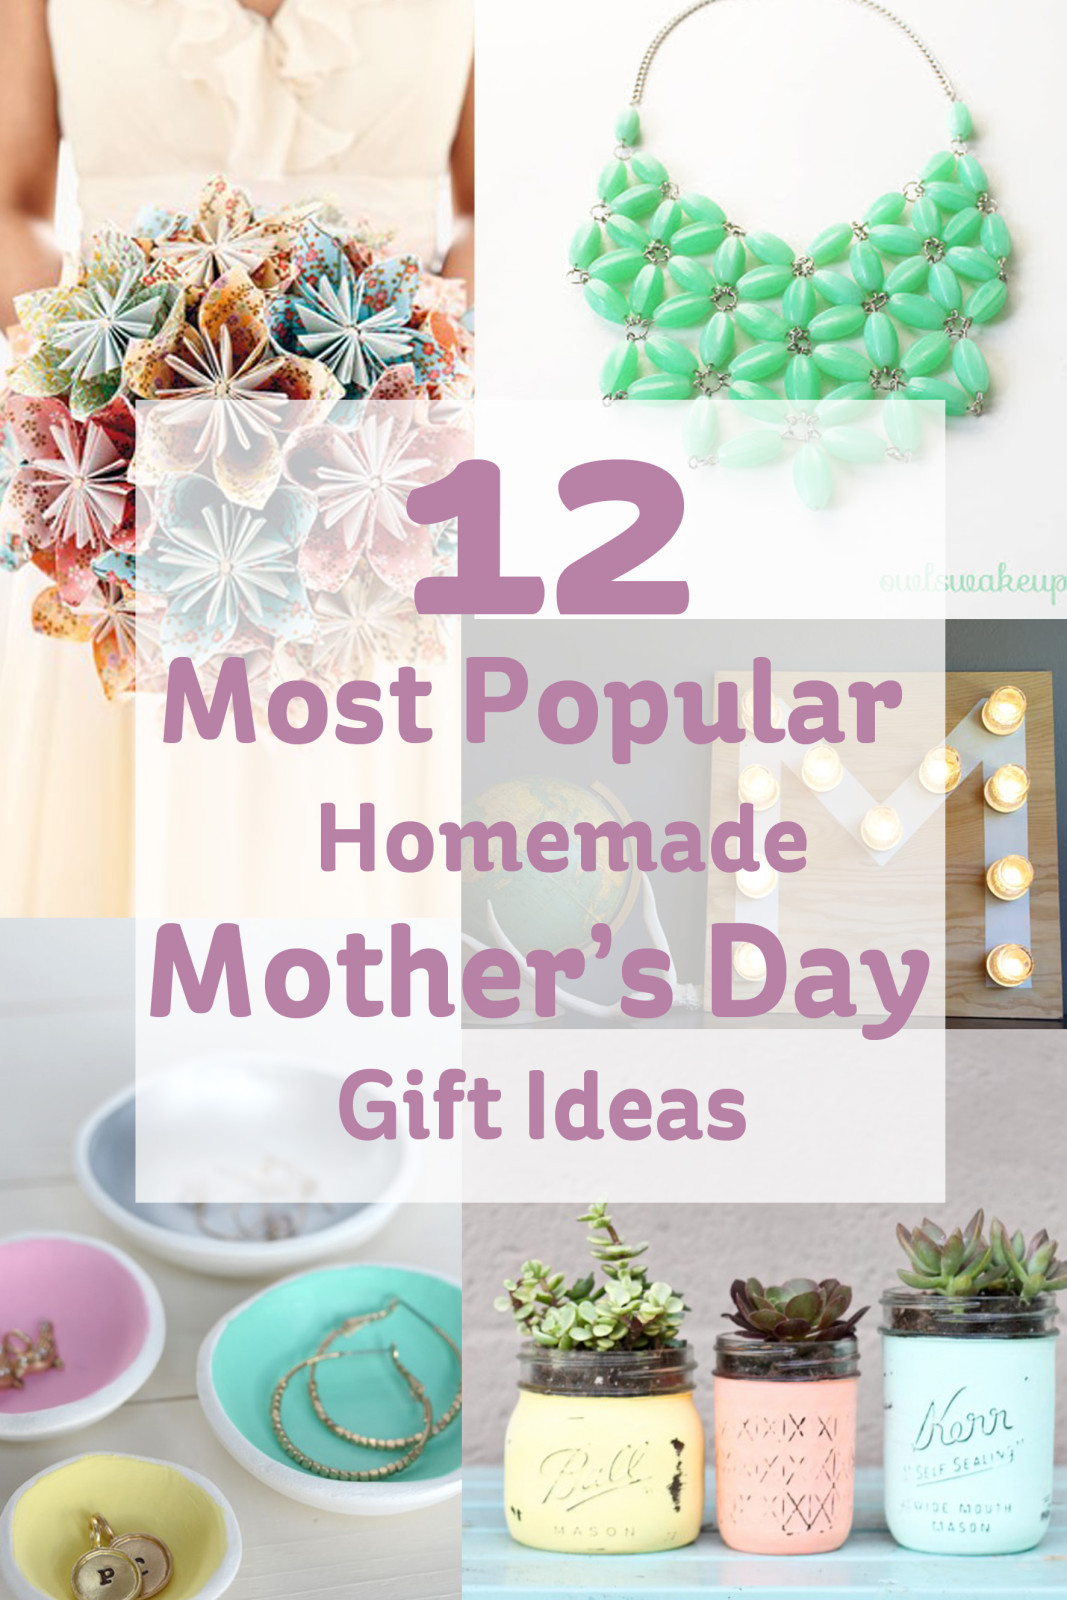 Home Made Mothers Day Gifts
 12 Most Popular Homemade Mother s Day Gift Ideas